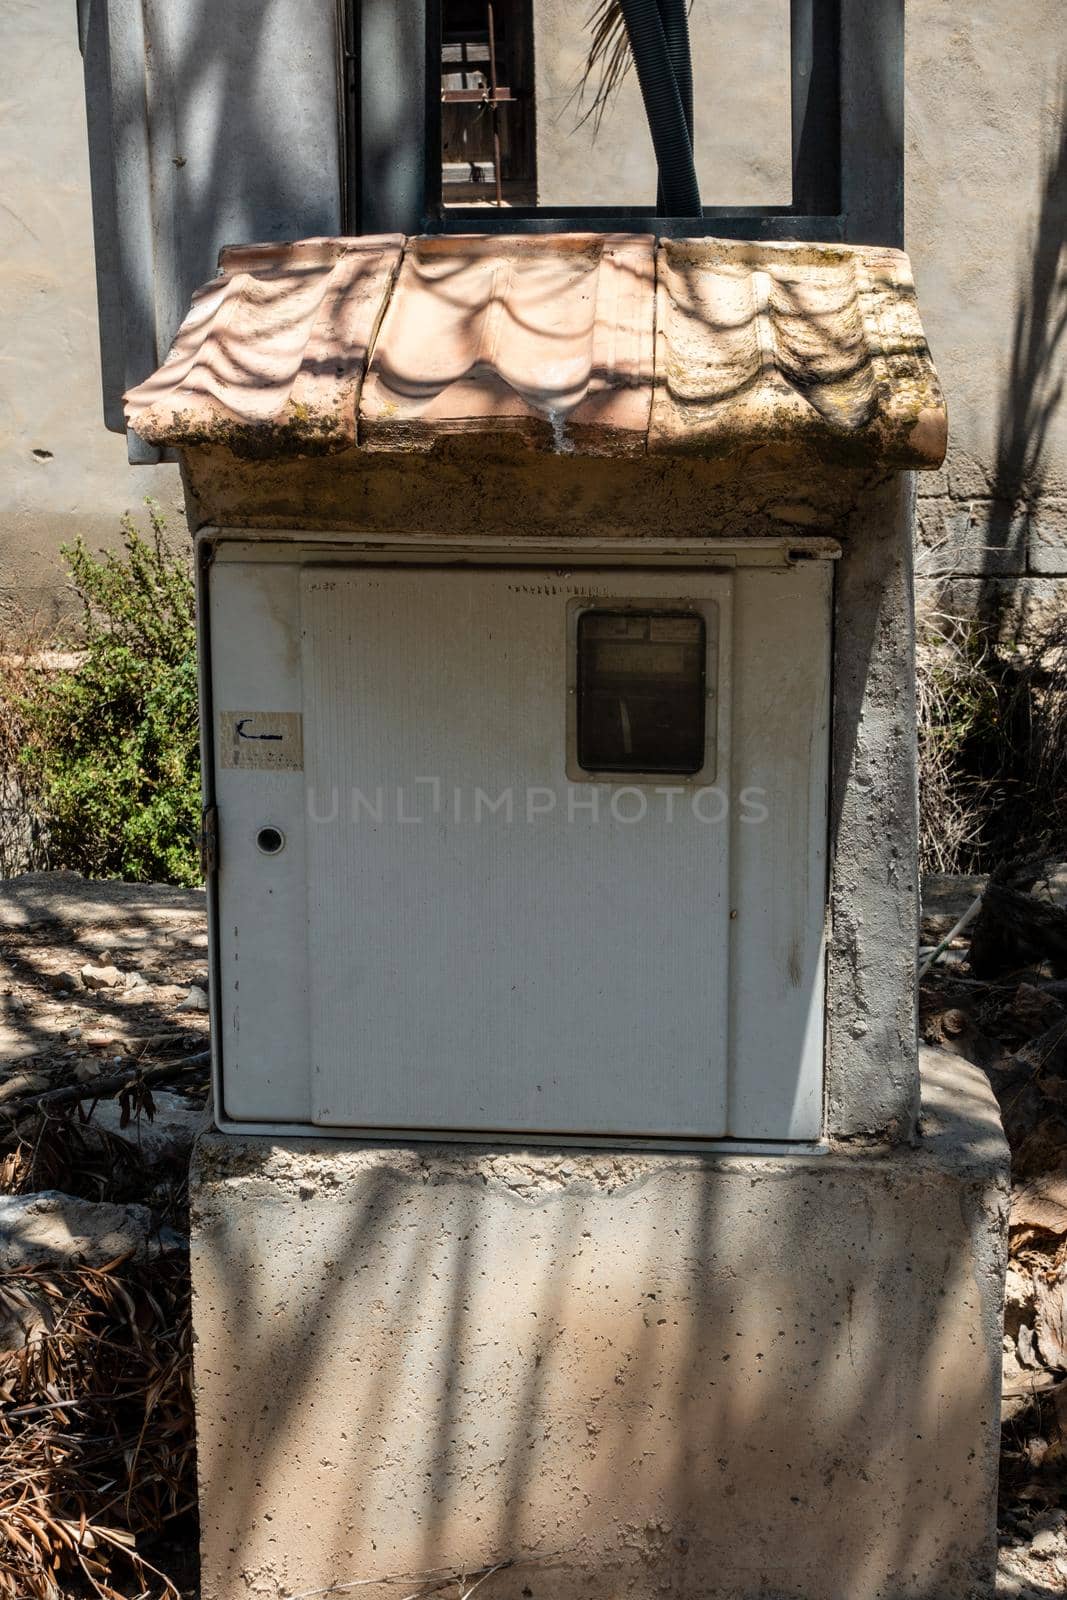 electric meter box with a tiled roof